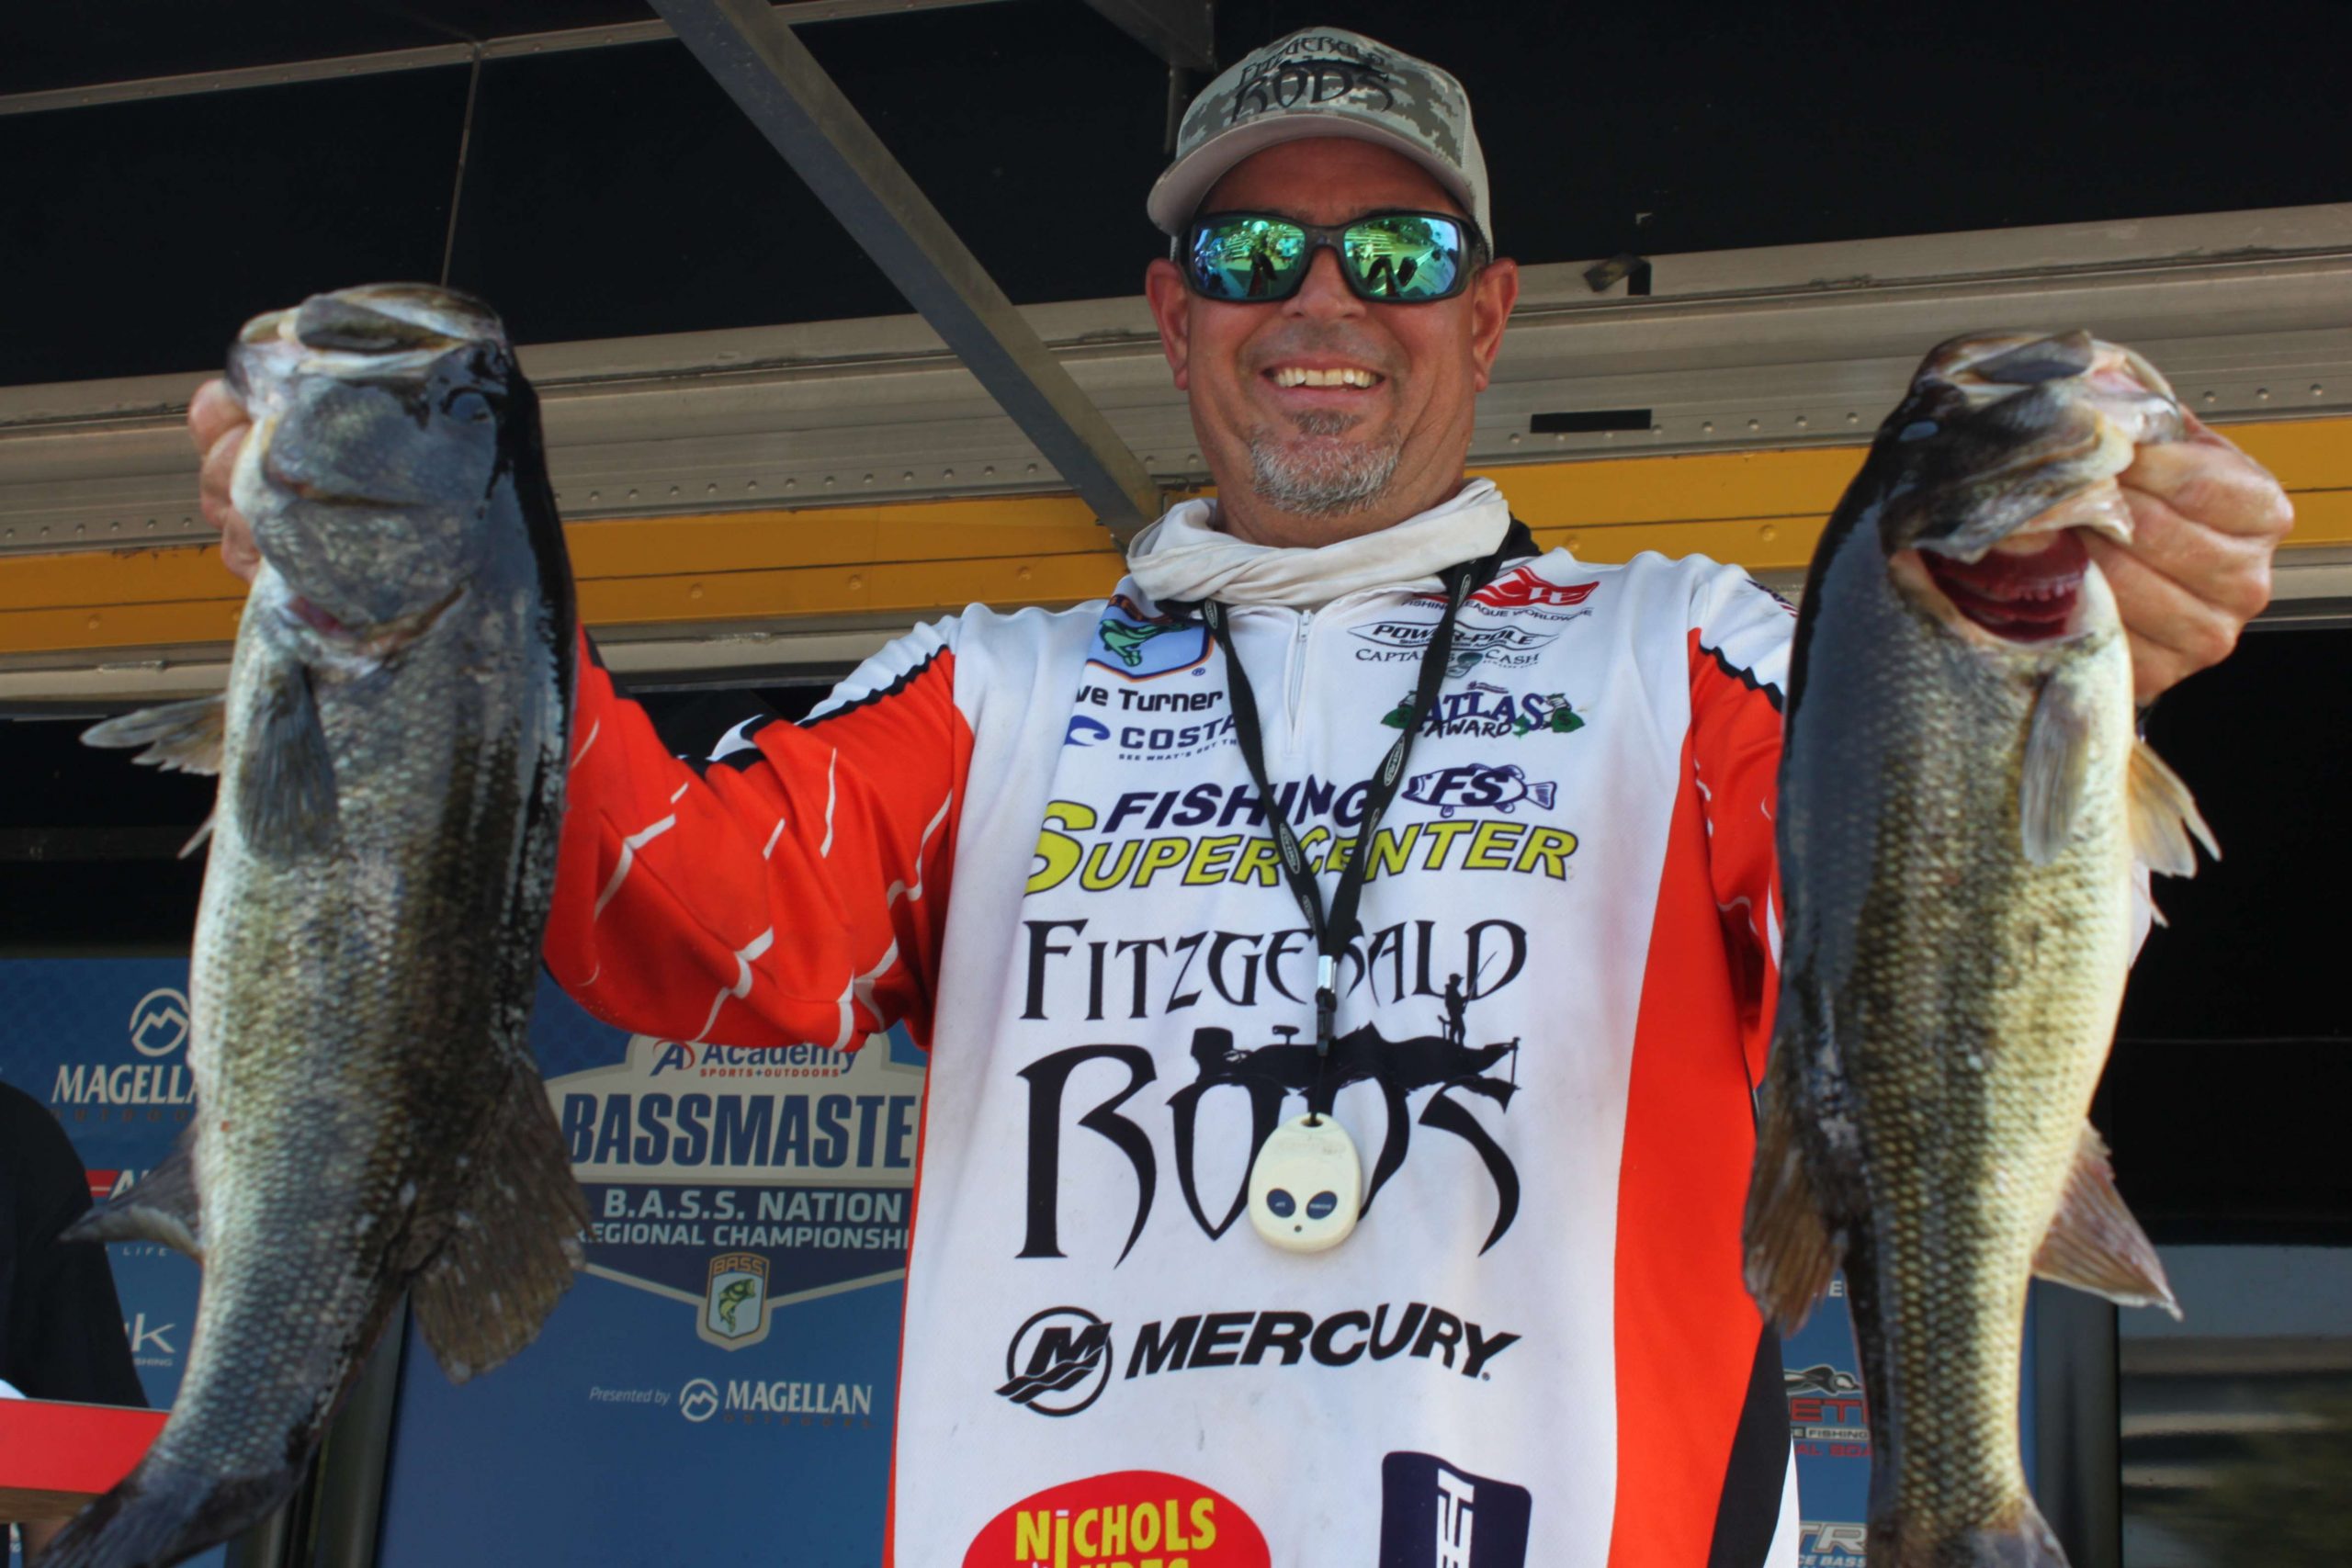 Thereâs the Day 1 leader â Dave Turner of Crystal River, Fla. Turner led all boaters with five bass that weighed 14-4.